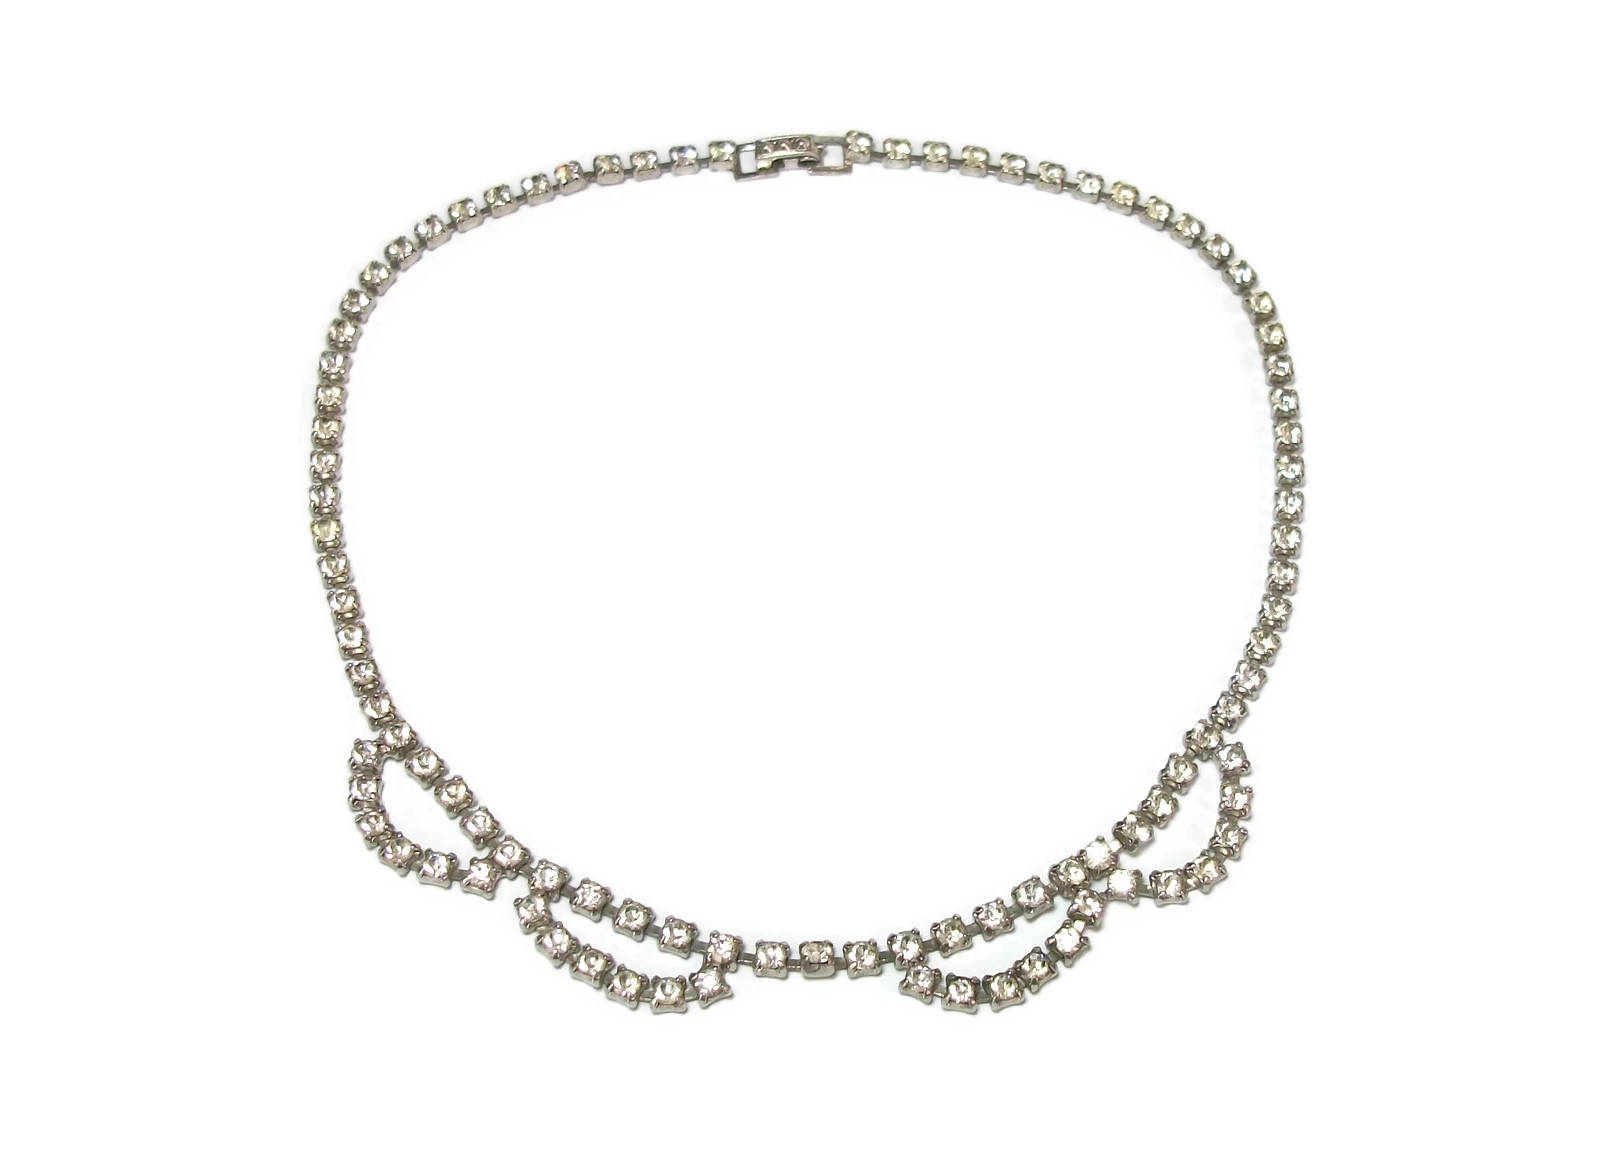 Vintage Rhinestone Scalloped Choker Necklace 14 1/2 inch long Formal ...